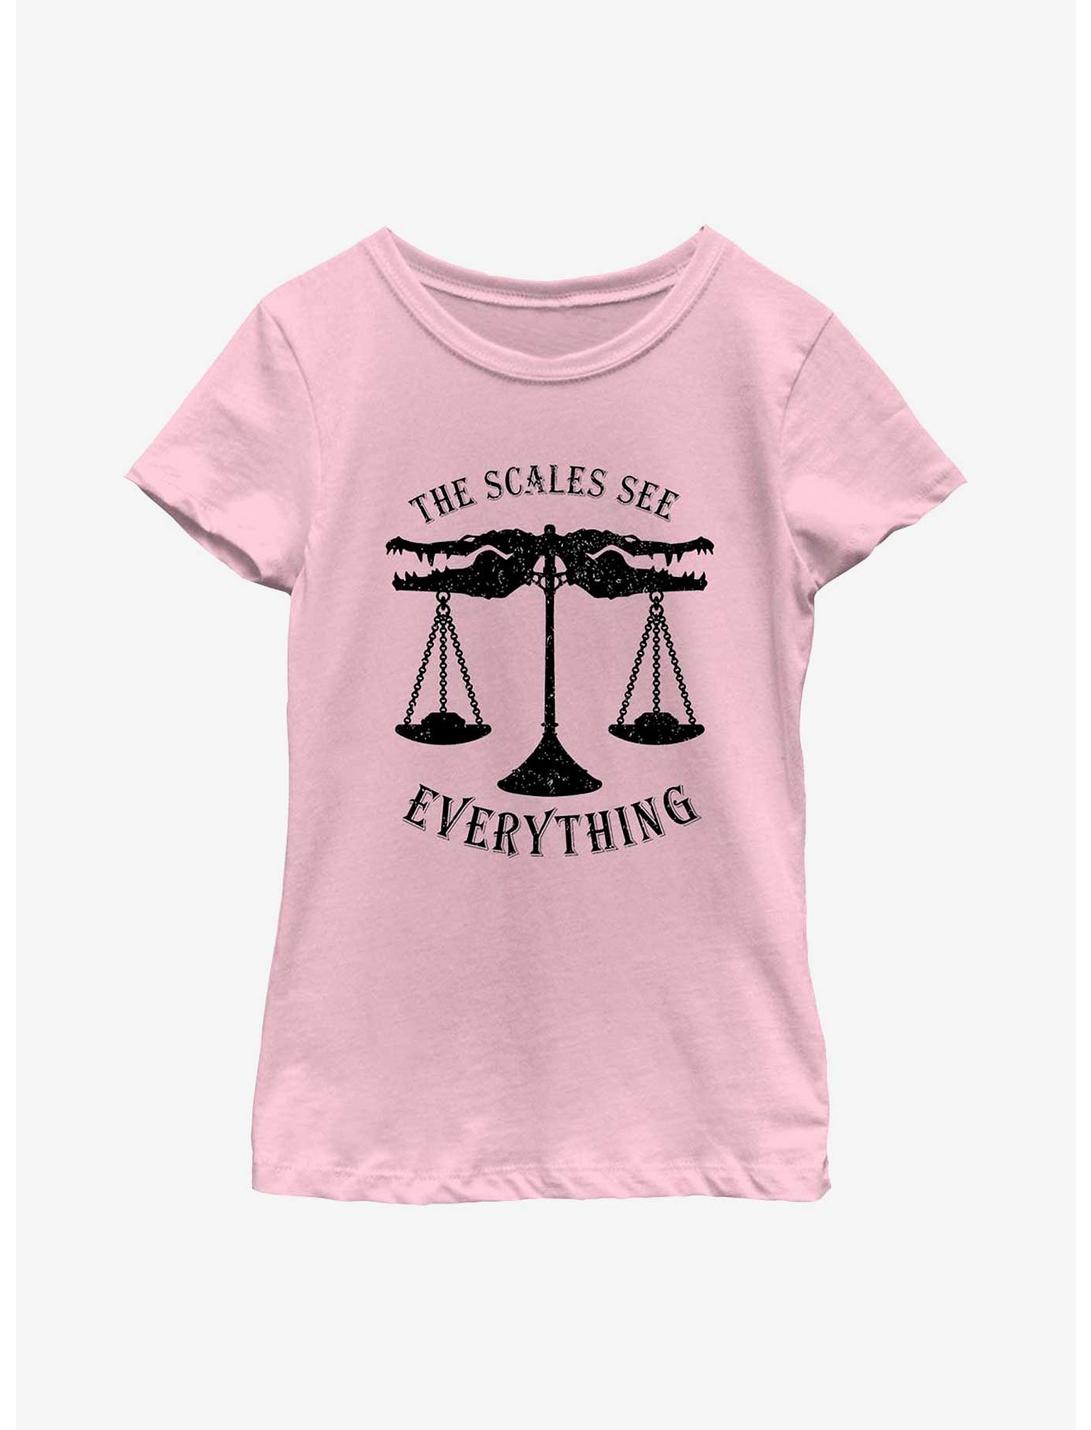 Marvel Moon Knight The Scales See Everything Youth Girls T-Shirt, PINK, hi-res